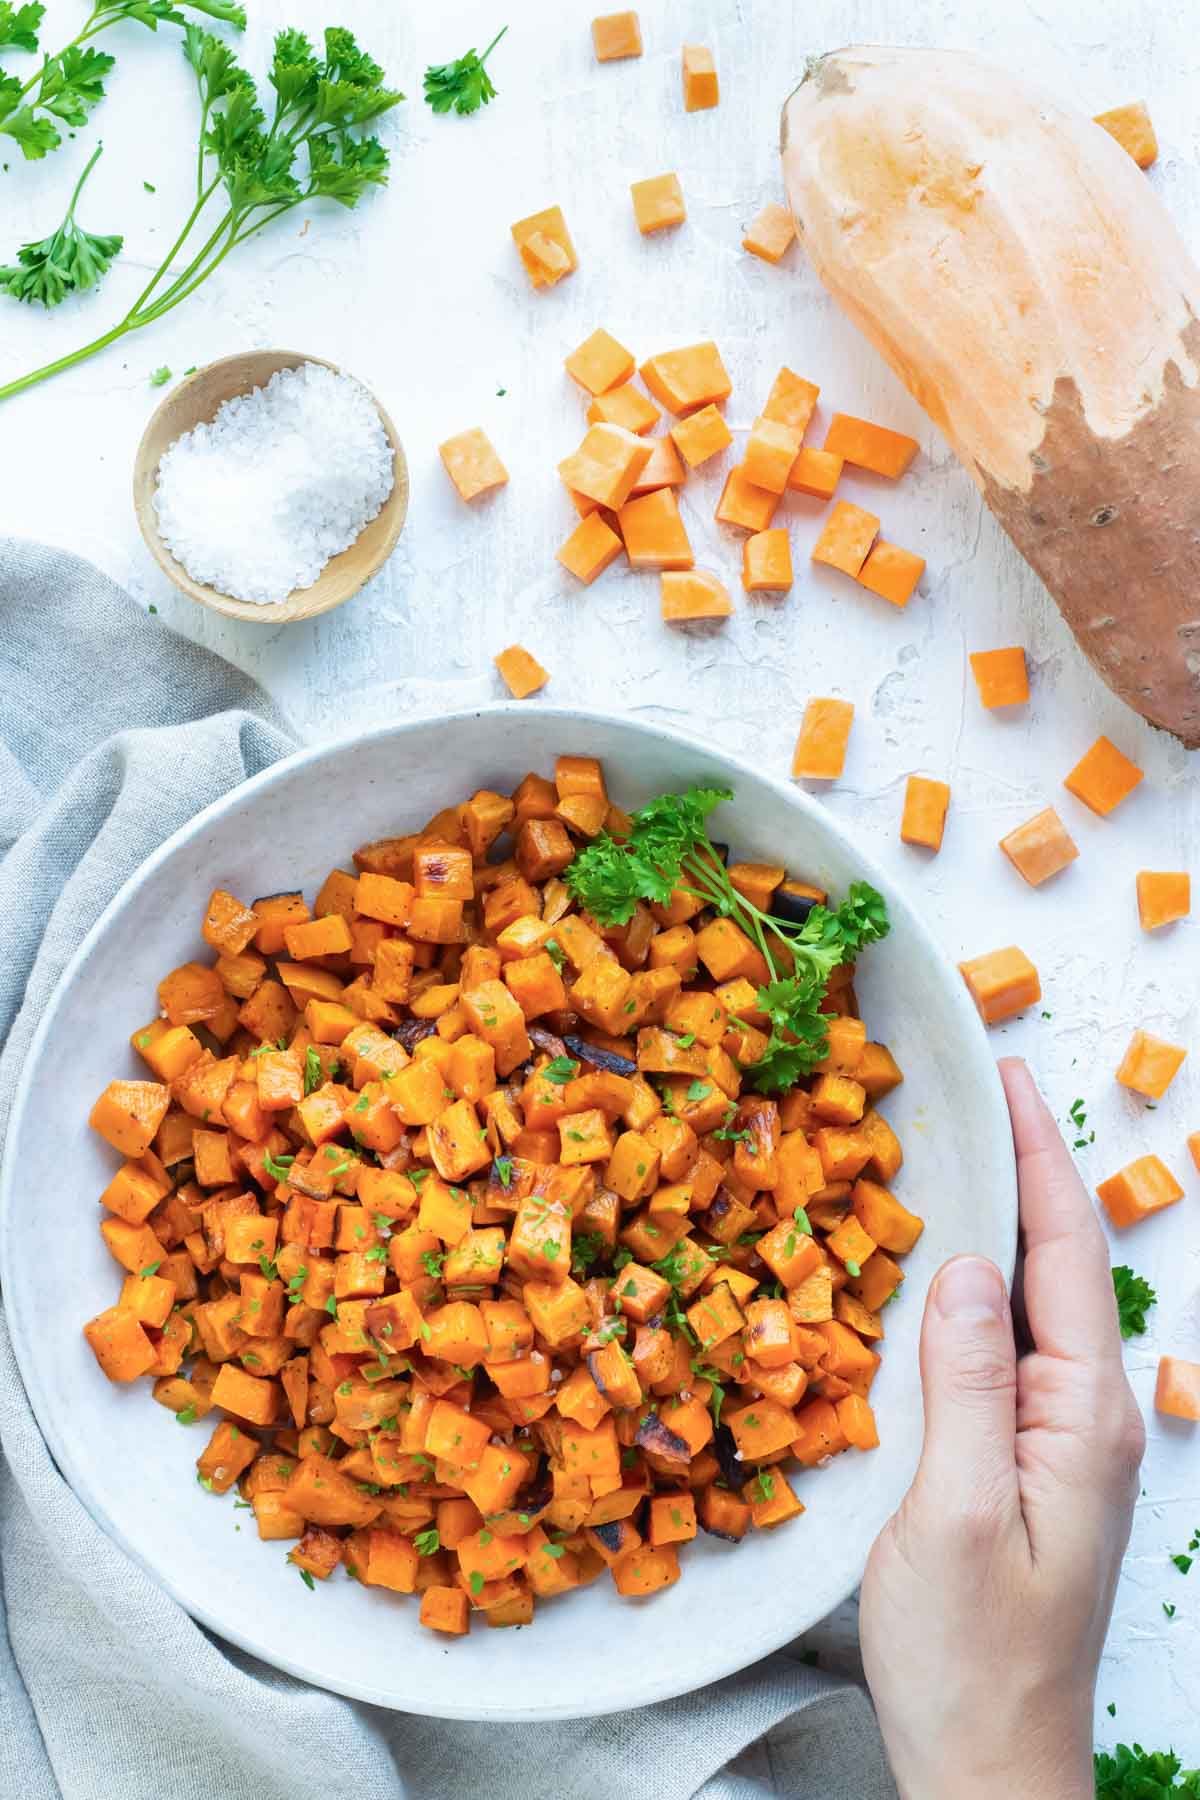 Oven roasted sweet potato cubes in a white bowl.